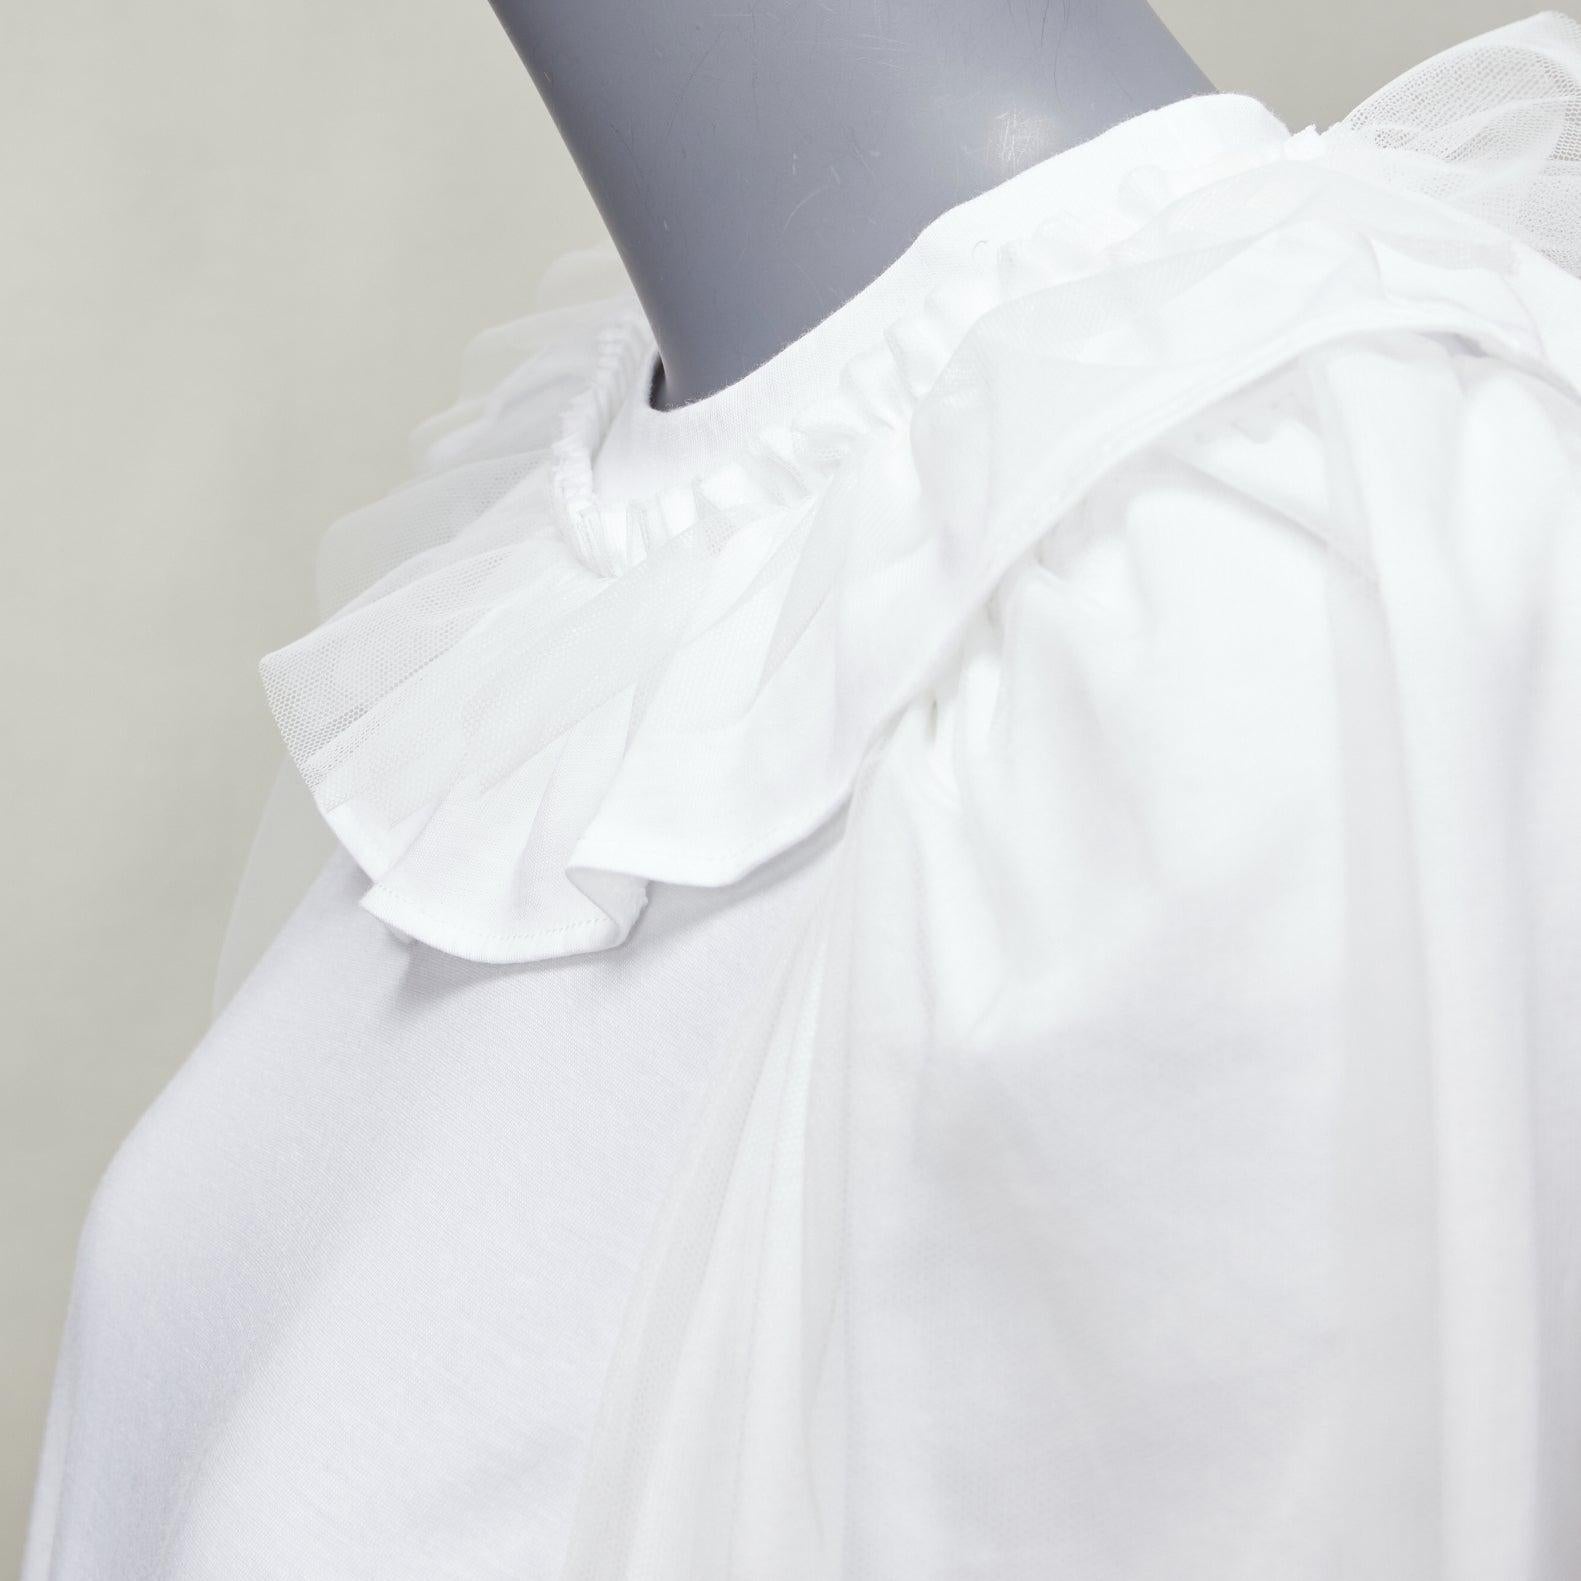 SIMONE ROCHA white cotton ruffle collar puff tulle sleeve long tshirt XS
Reference: AAWC/A01141
Brand: Simone Rocha
Material: Cotton, Polyamide
Color: White
Pattern: Solid
Closure: Pullover
Made in: Portugal

CONDITION:
Condition: Excellent, this